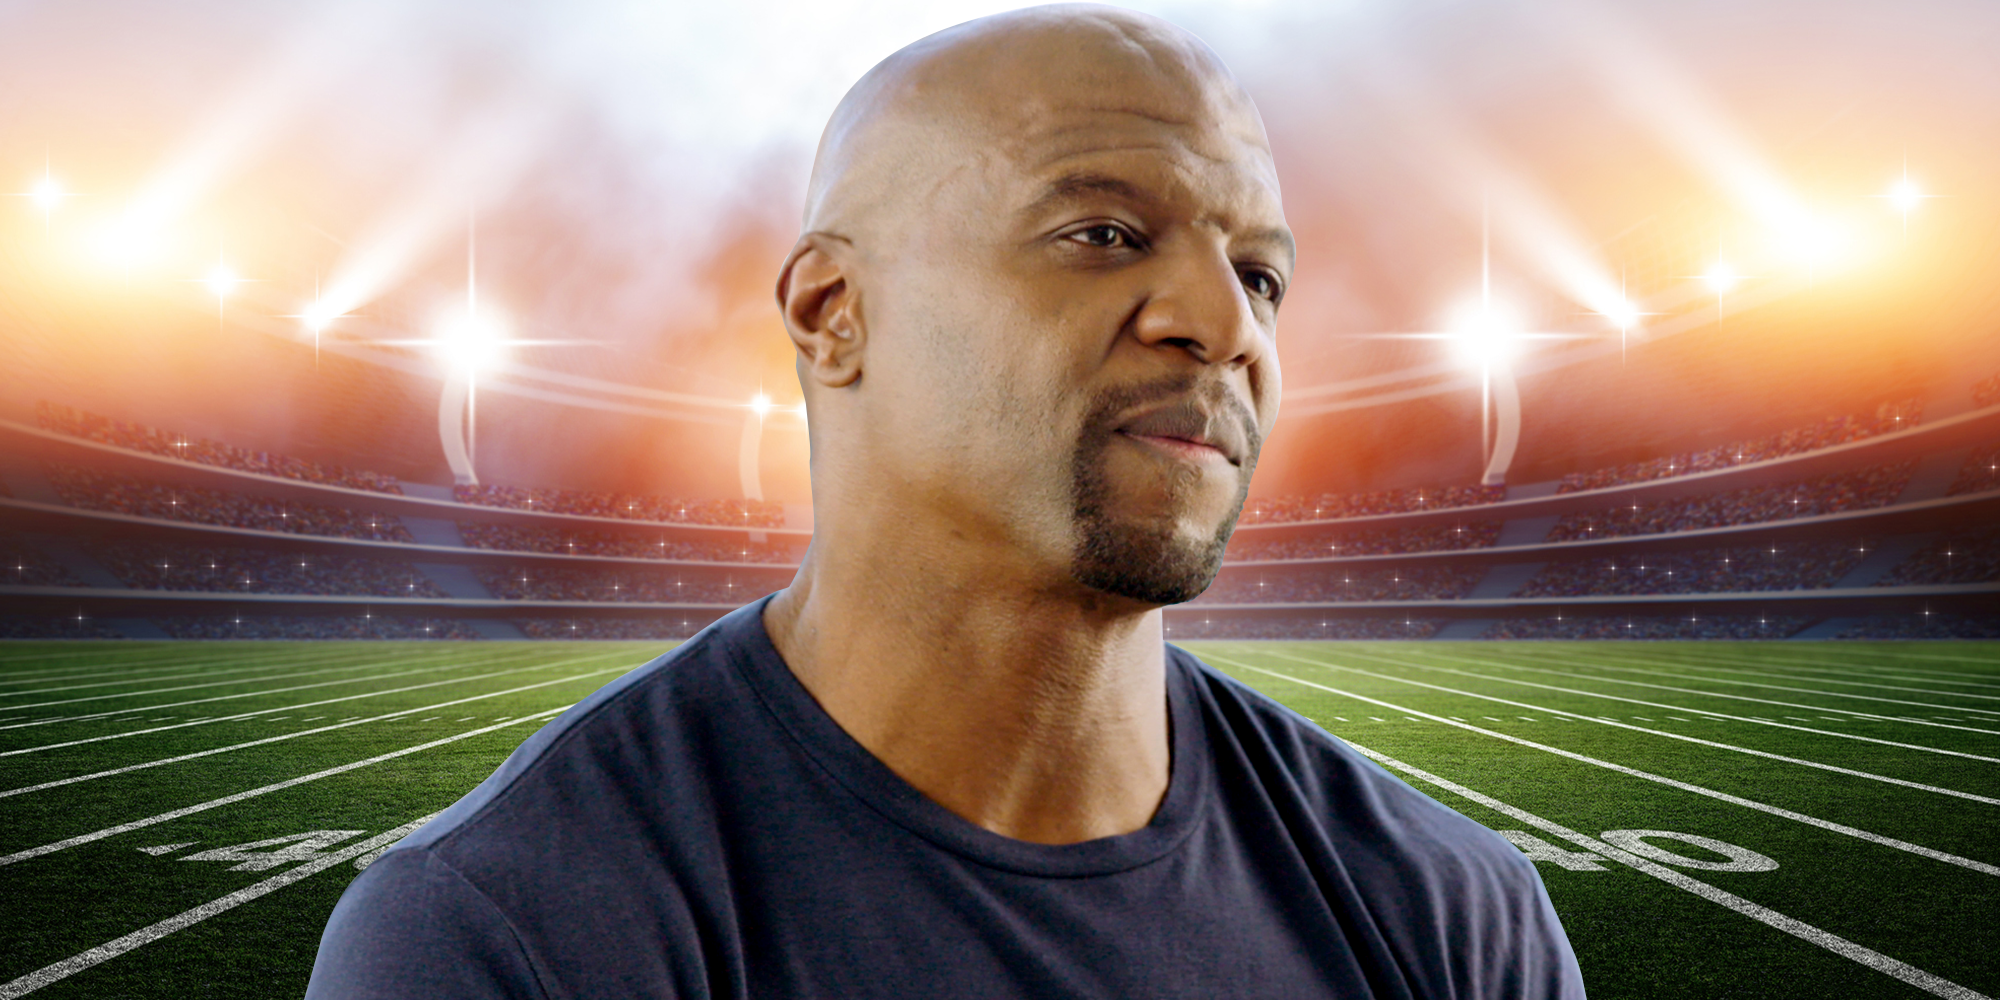 Terry Crews Opens Up About Playing in the NFL With a Severe Concussion